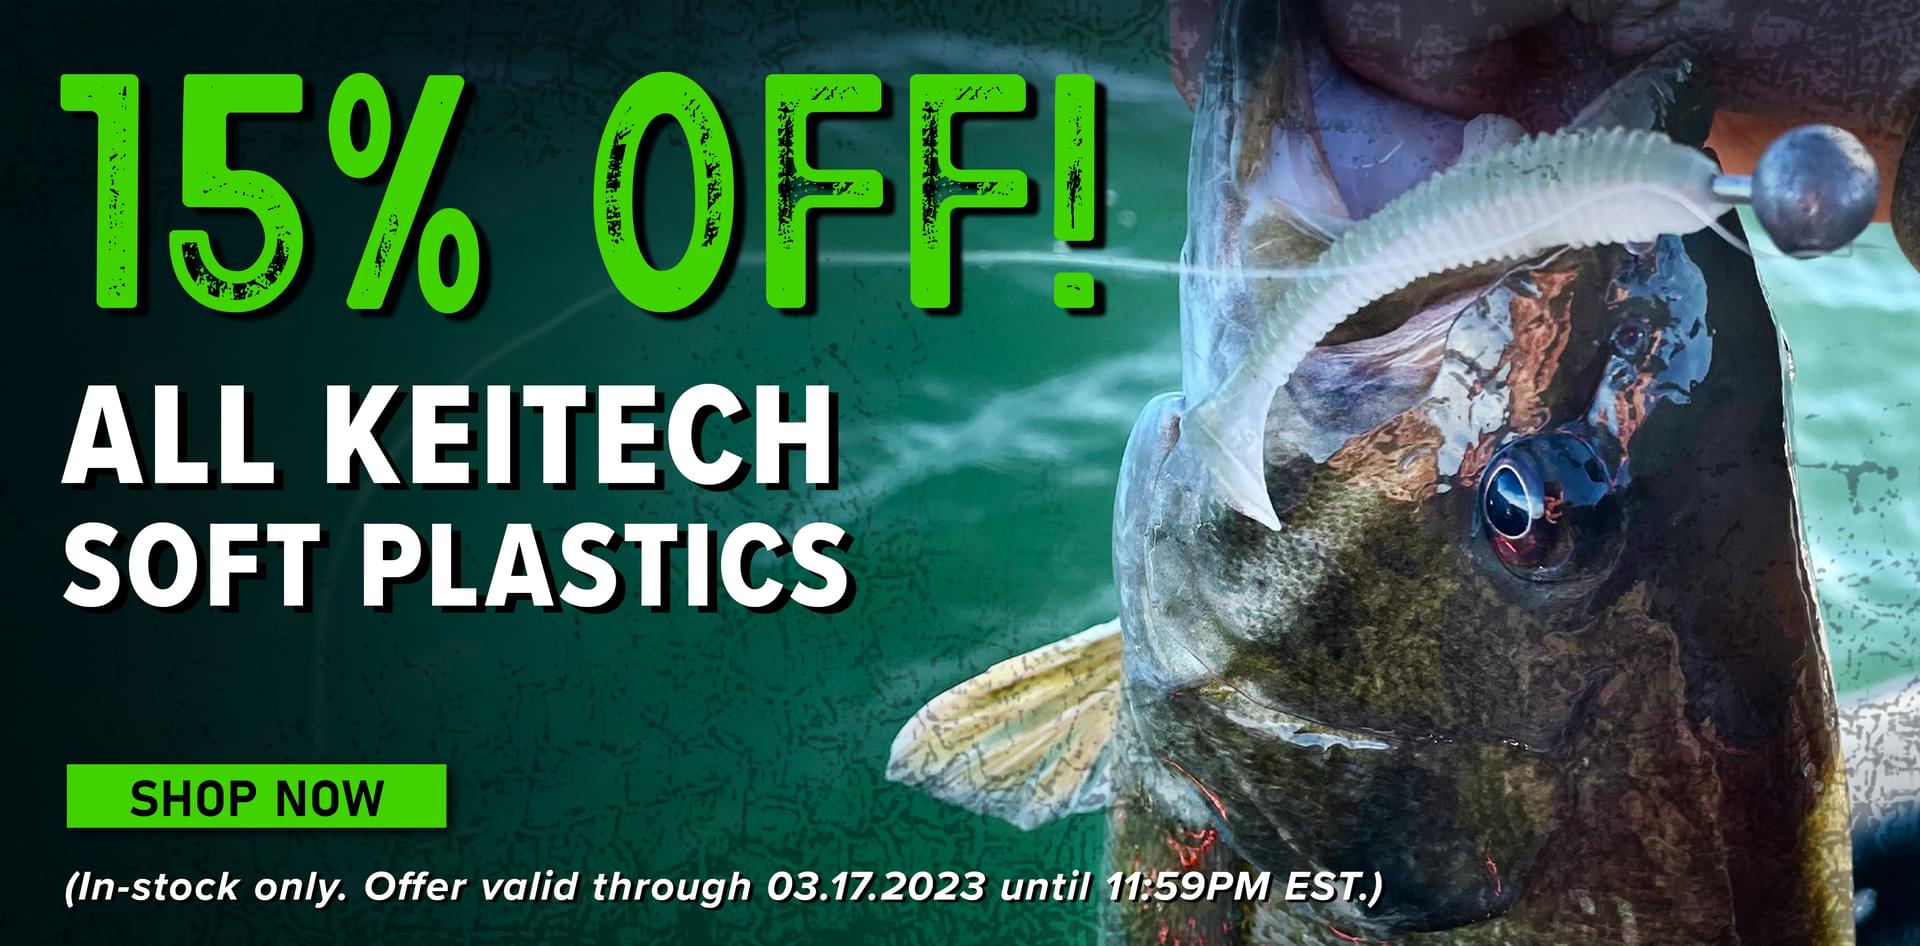 15% Off! All Keitech Soft Plastics Shop Now (In-stock only. Offer valid 03.17.2023 until 11:59PM EST.)